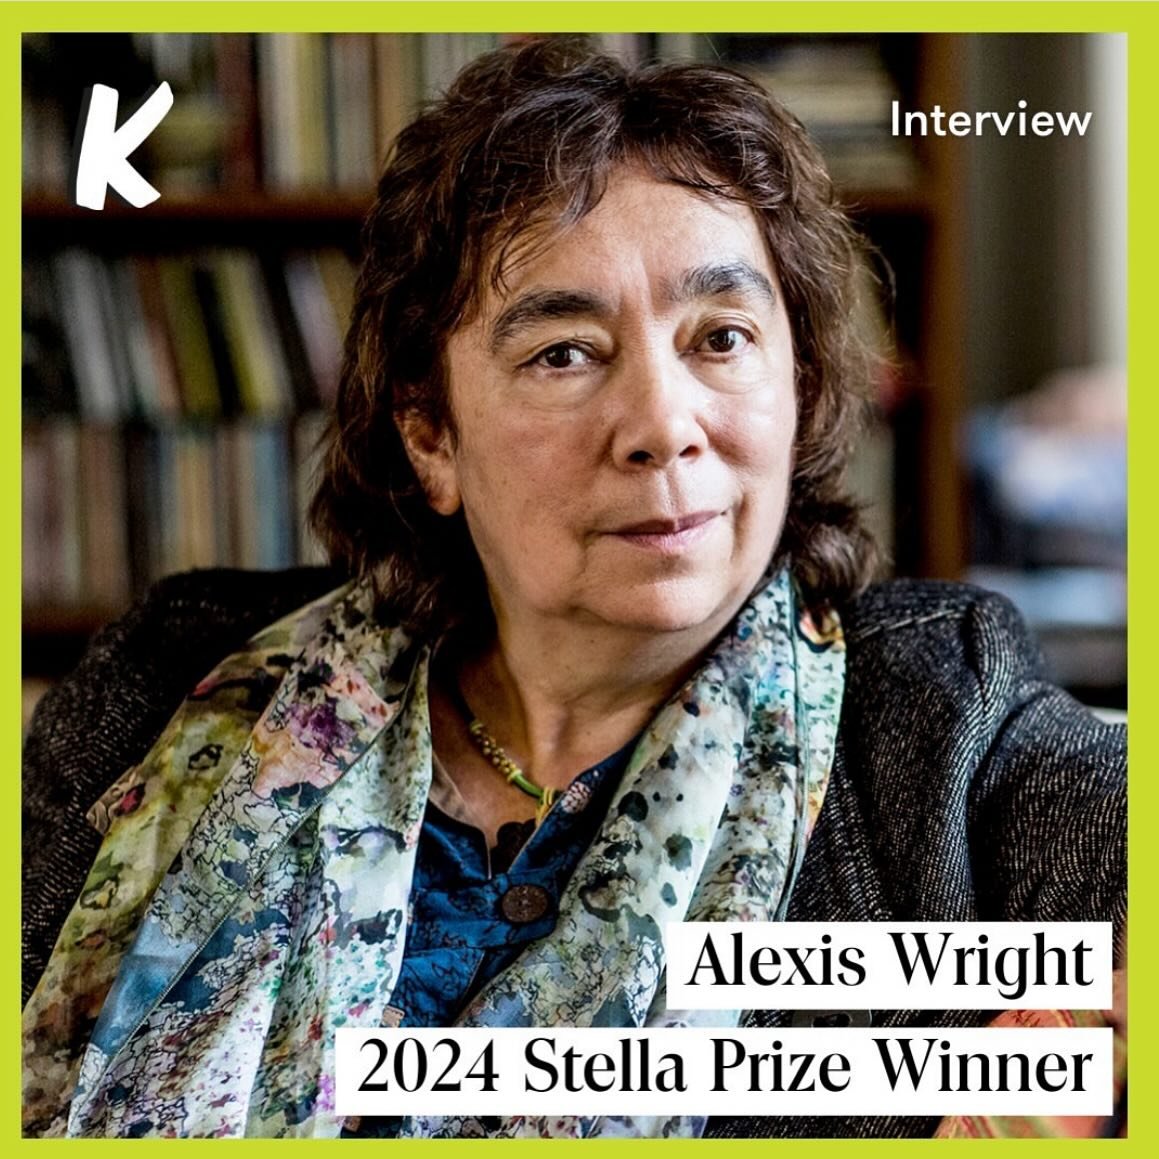 Over at @kyd_magazine, Mary Martin bookseller Suzy has interviewed the 2024 Stella Prize winner, Alexis Wright! Find out about her record-setting second win, how she wrote the epic &lsquo;Praiseworthy&rsquo; and more!